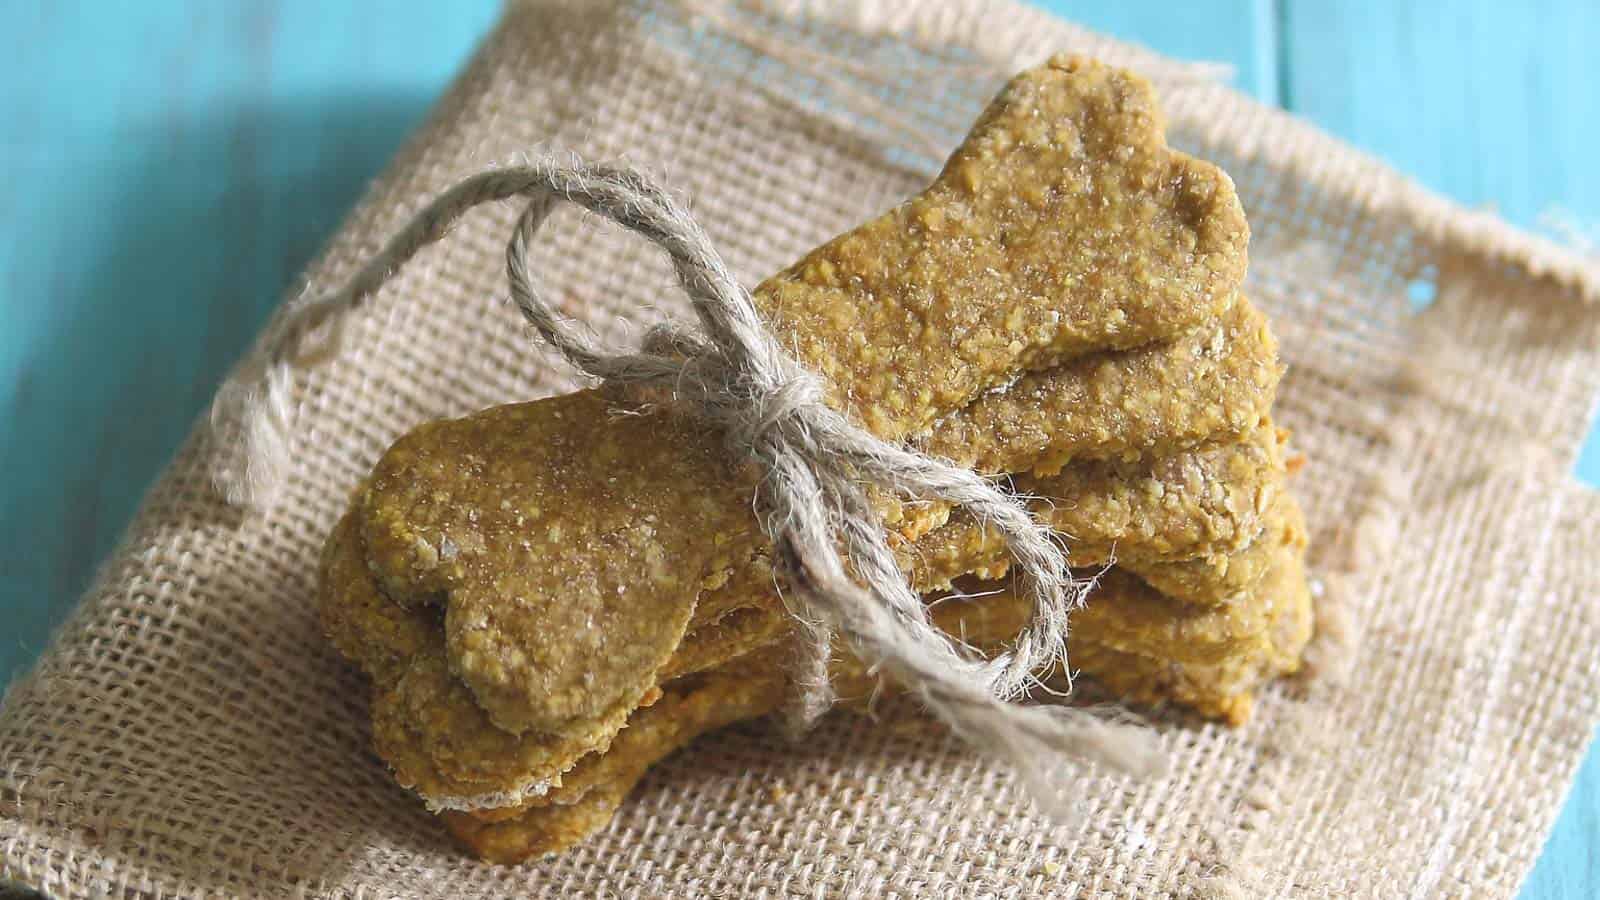 Pumpkin peanut butter dog treats in the shape of a dog biscuit tied with twine on burlap.